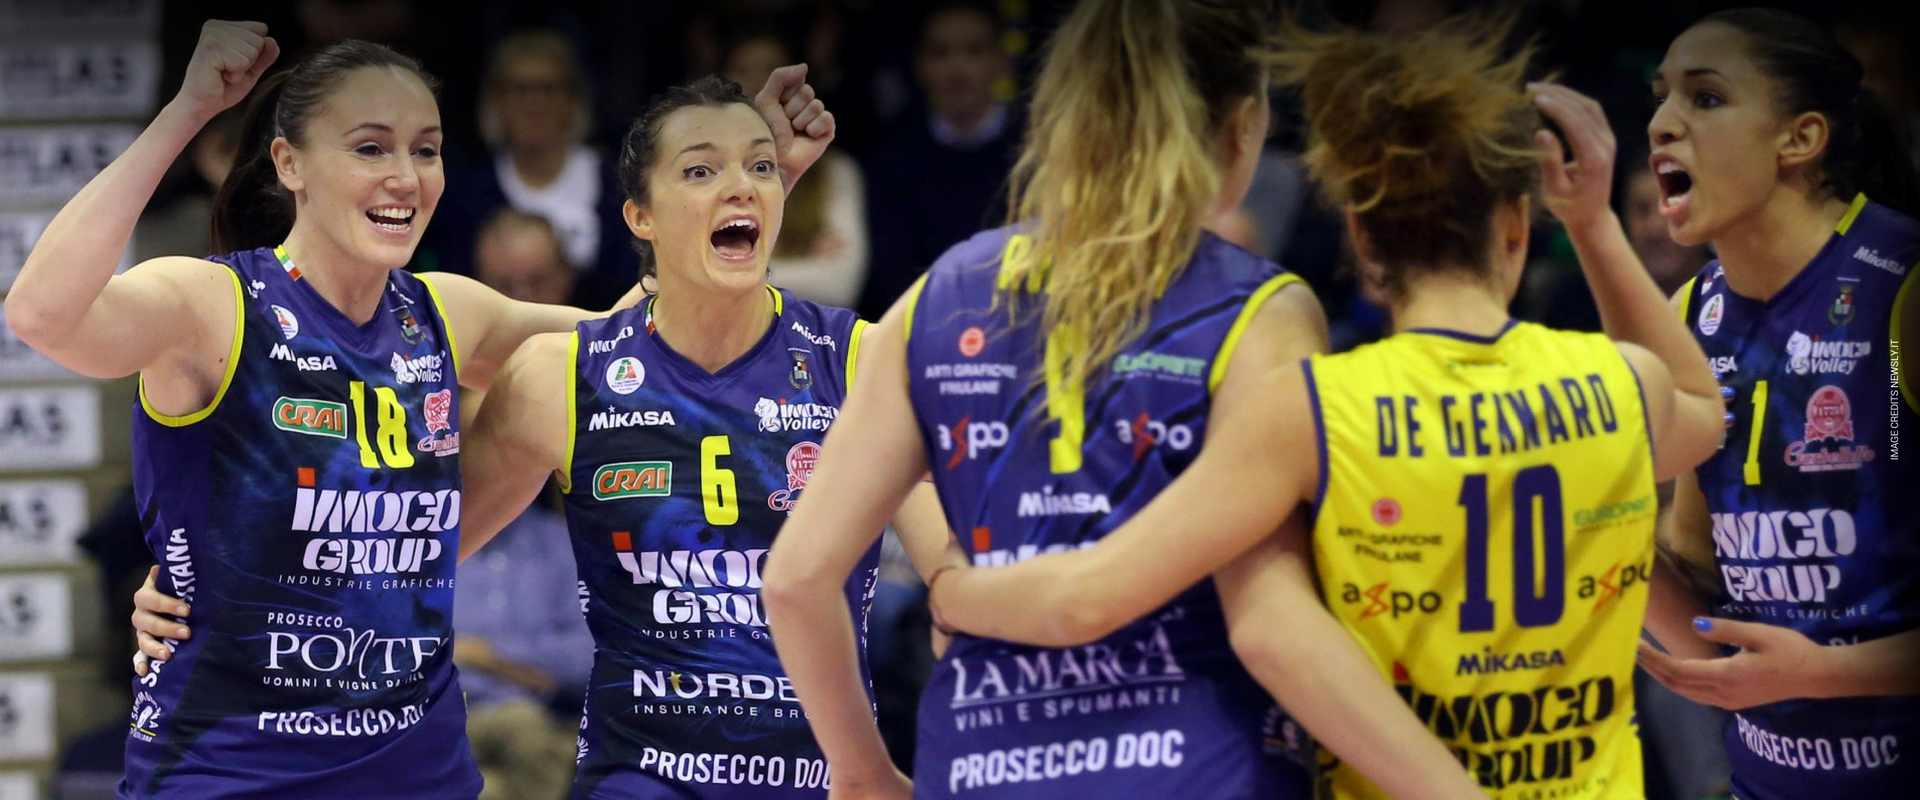 imoco volley fan engagement